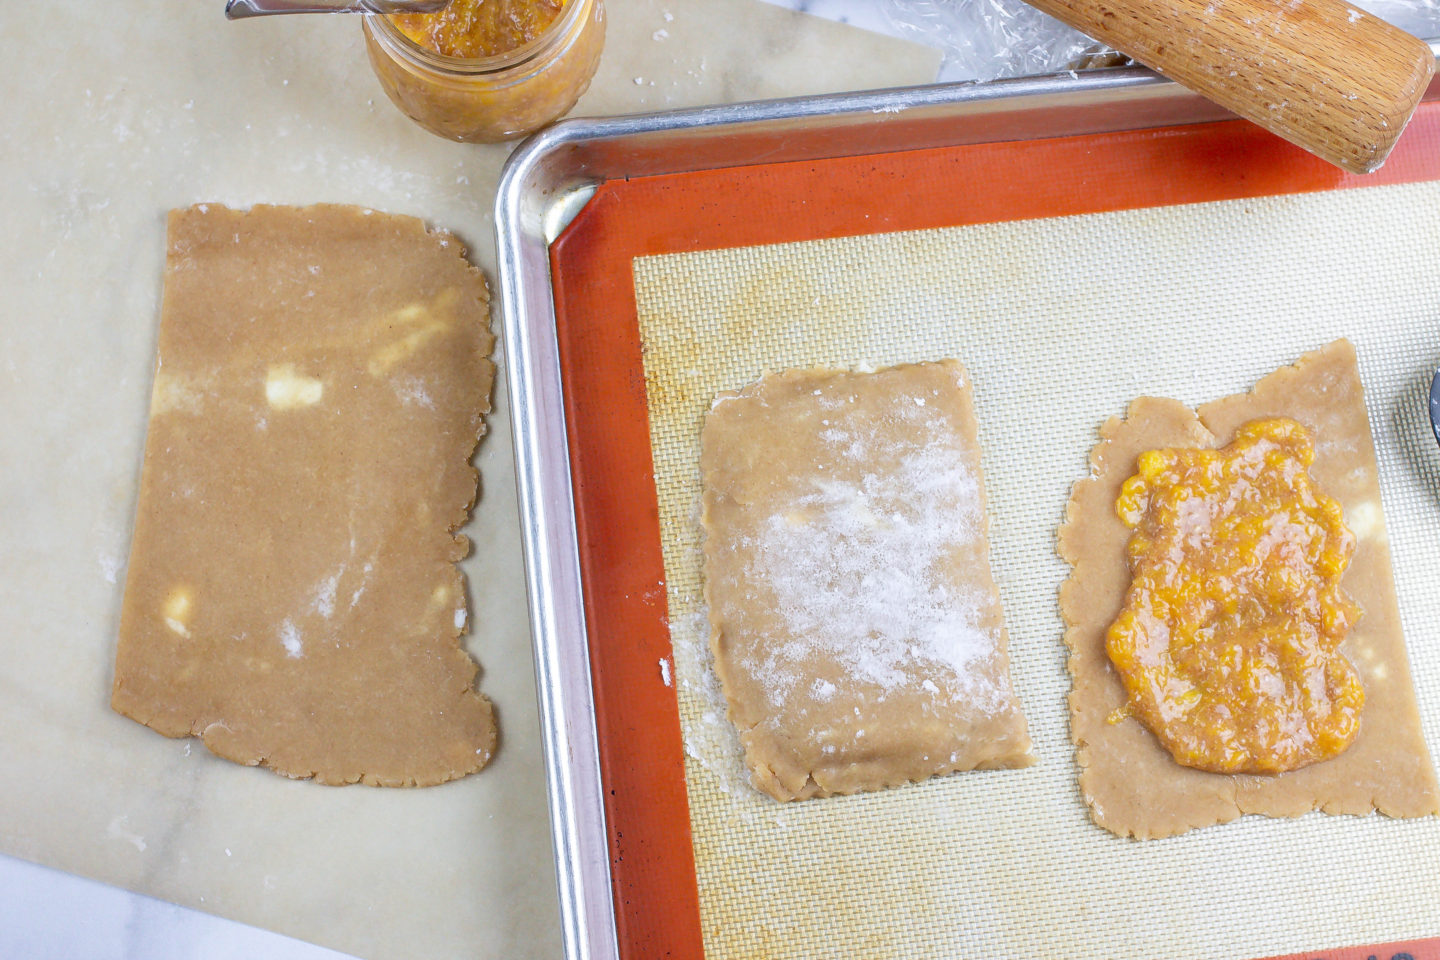 Peach and Ginger Pop Tarts rolled out and one with Peach Ginger Jam on the bottom crust